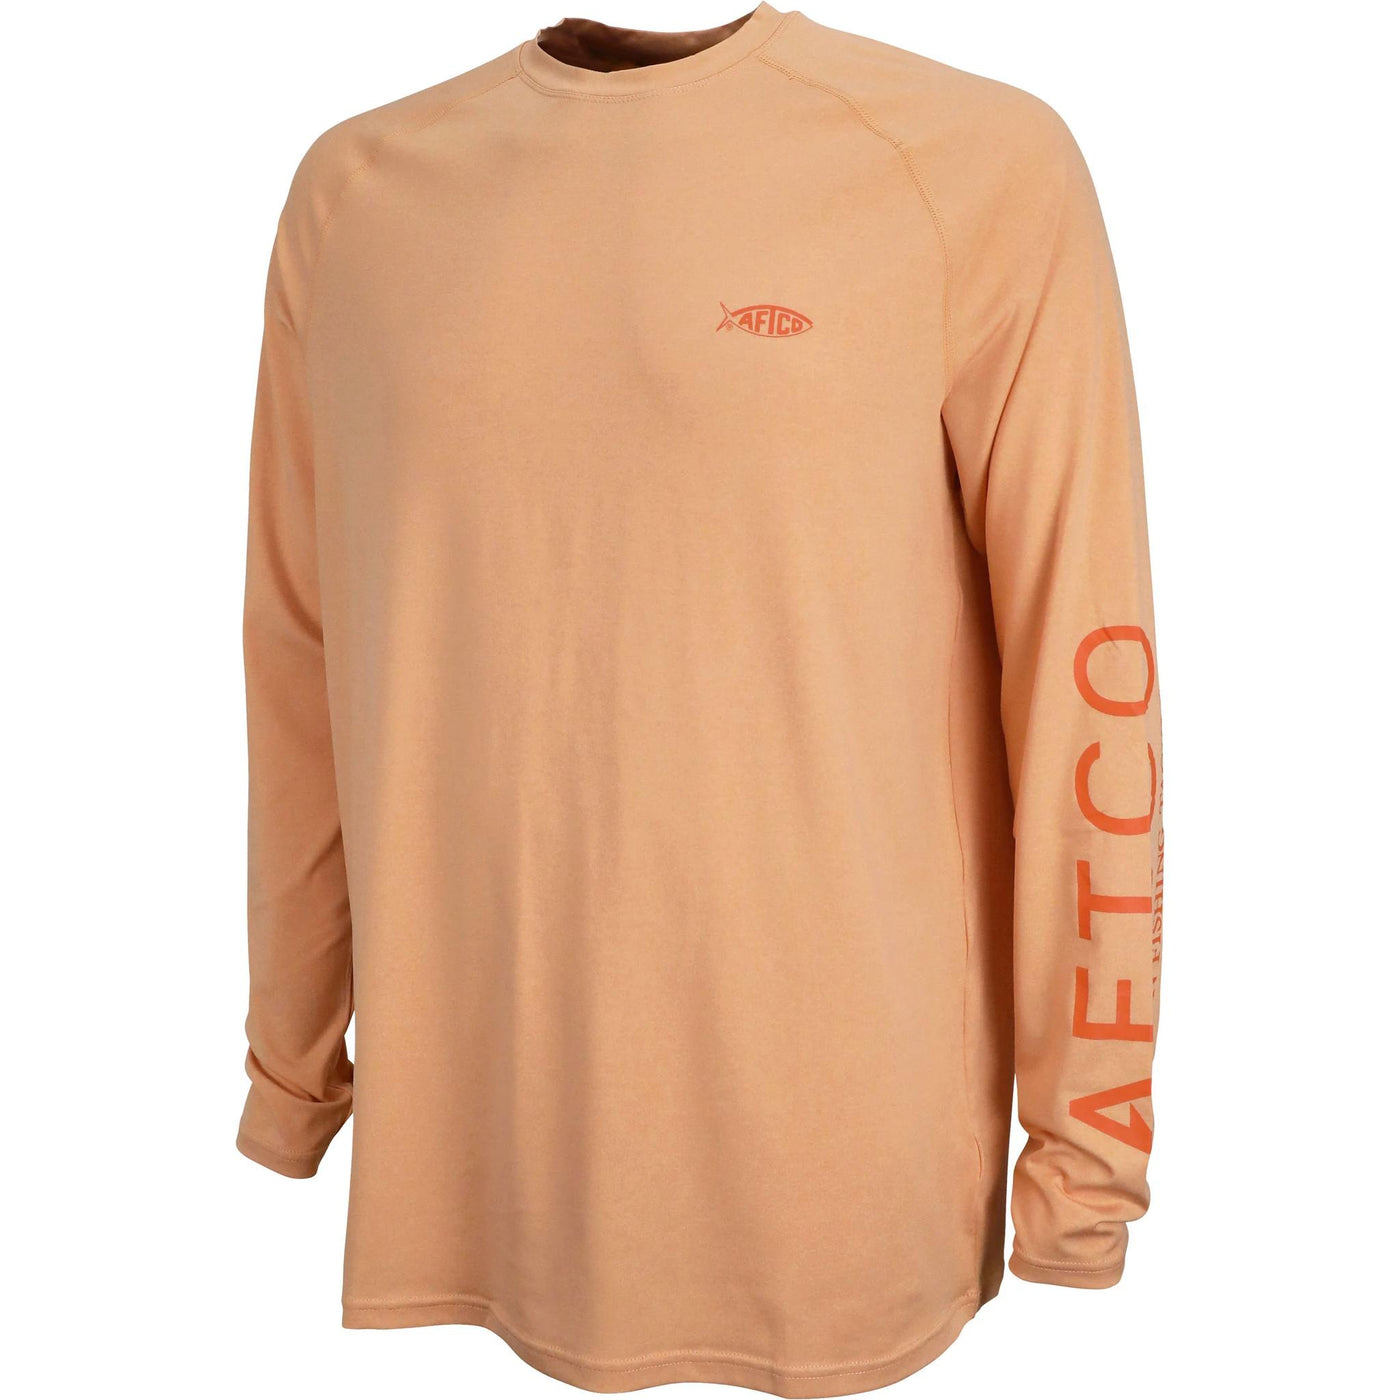 AFTCO Samurai Performance Shirt-MENS CLOTHING-Kevin's Fine Outdoor Gear & Apparel